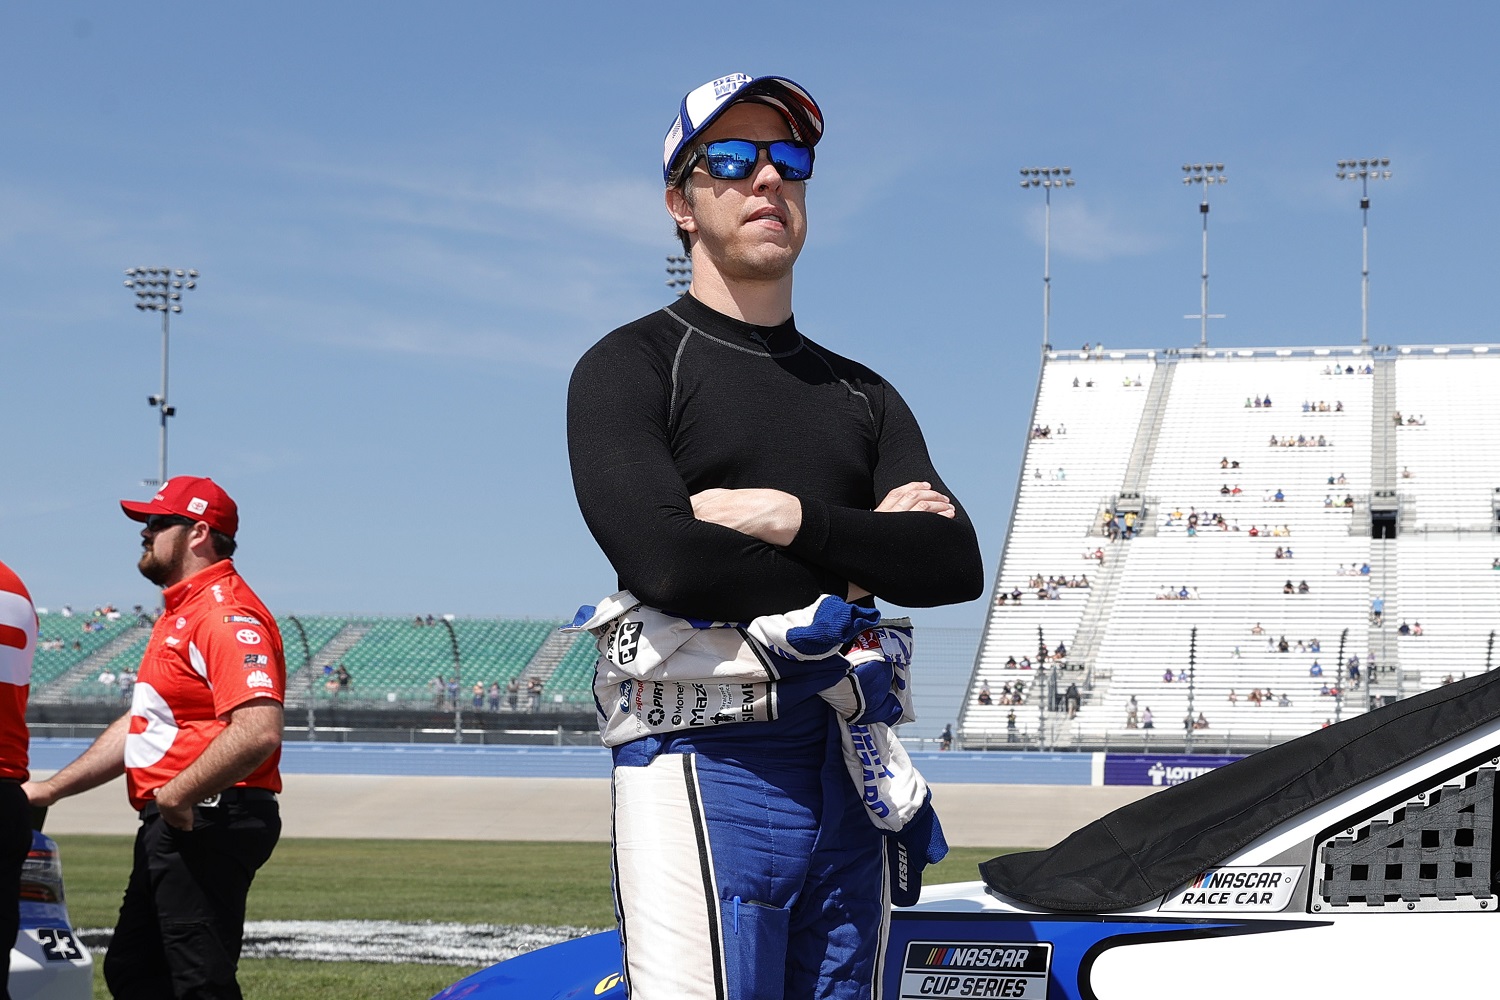 Brad Keselowski waits on the grid during qualifying for the NASCAR Cup Series Ally 400 at Nashville Superspeedway on June 20, 2021.